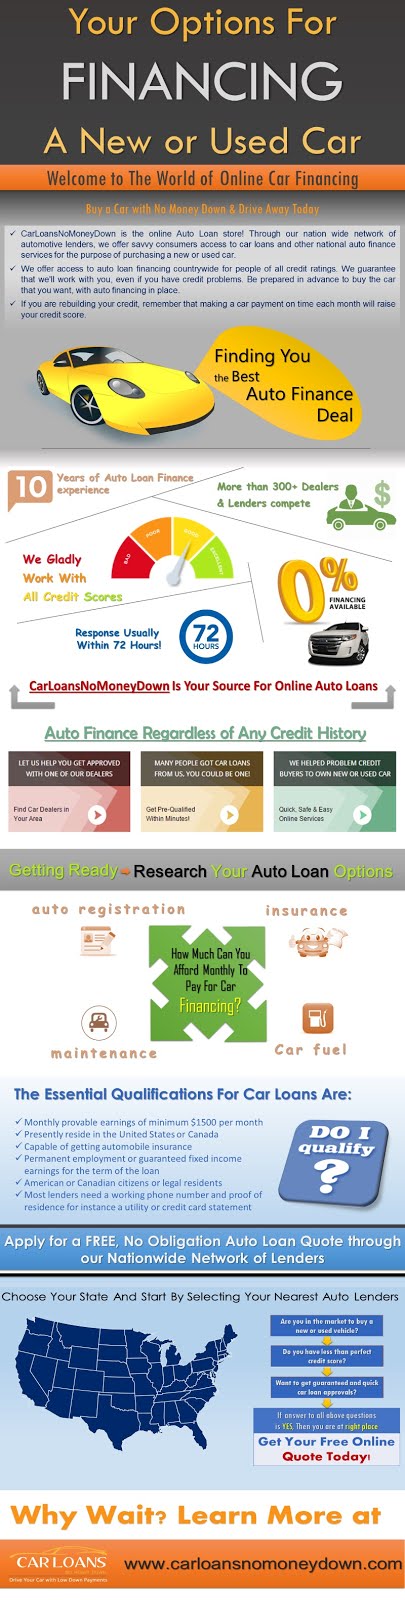 Auto Loan Options - Infographic